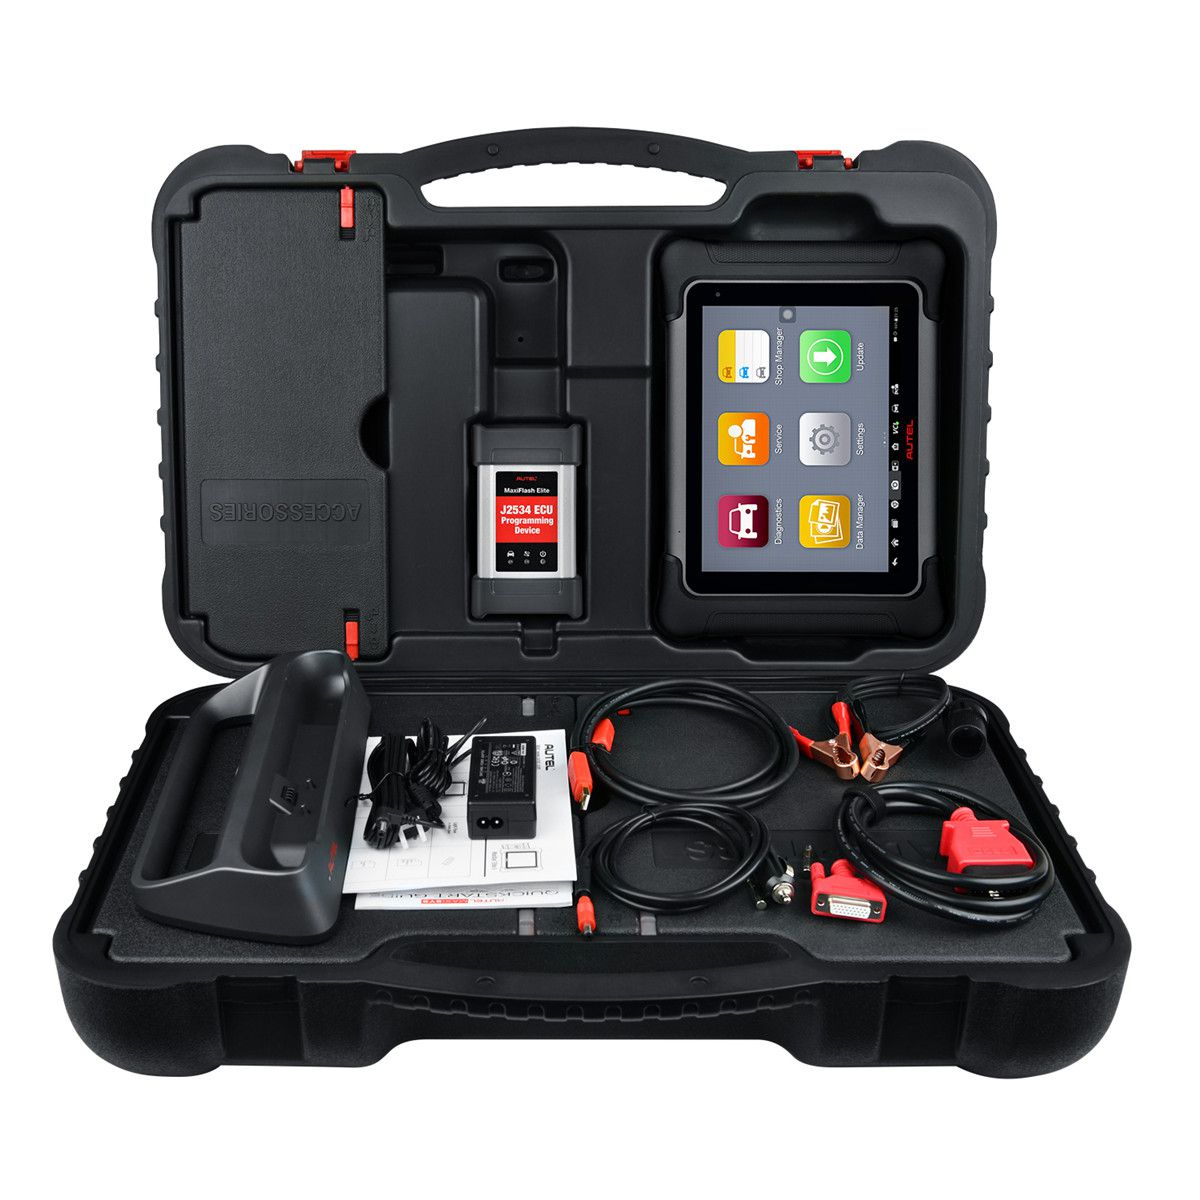 Autel Maxisys Elite II Diagnostic Tool with MaxiFlash J2534 Same Hardware as MS909 Upgraded Version of Maxisys Elite